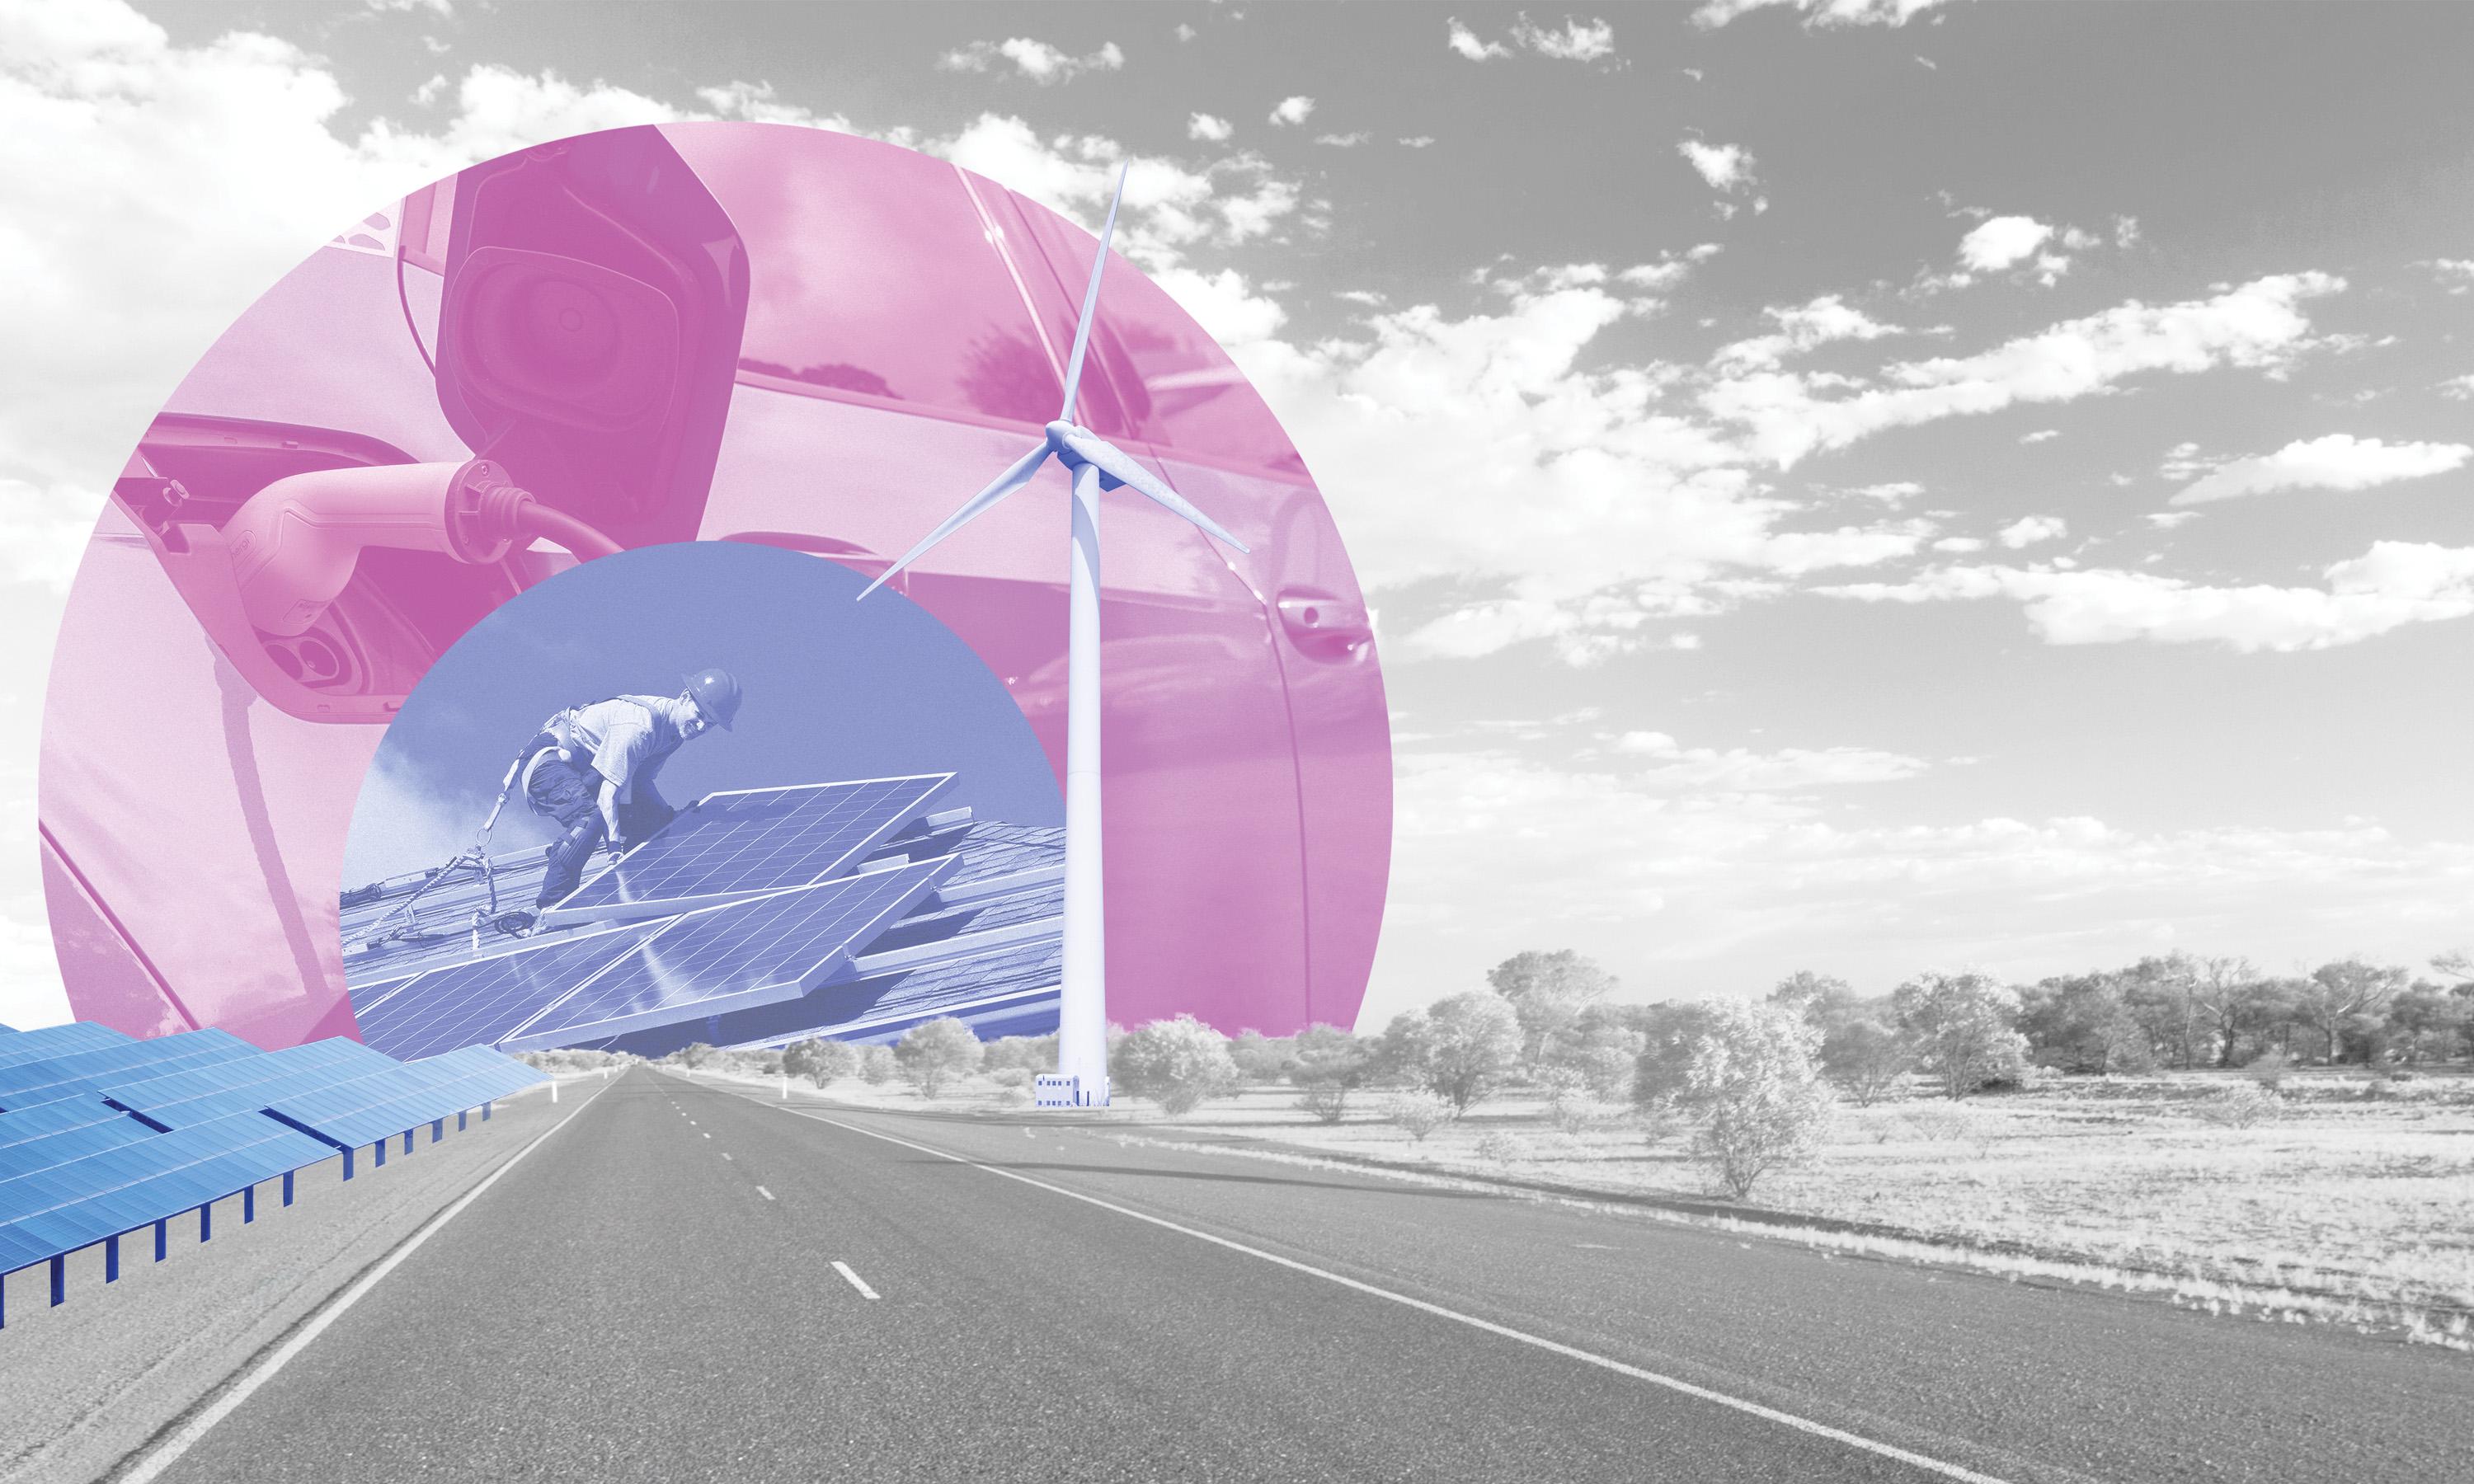 A collage showing solar panels, a wind turbine, an electric vehicle, and a road.